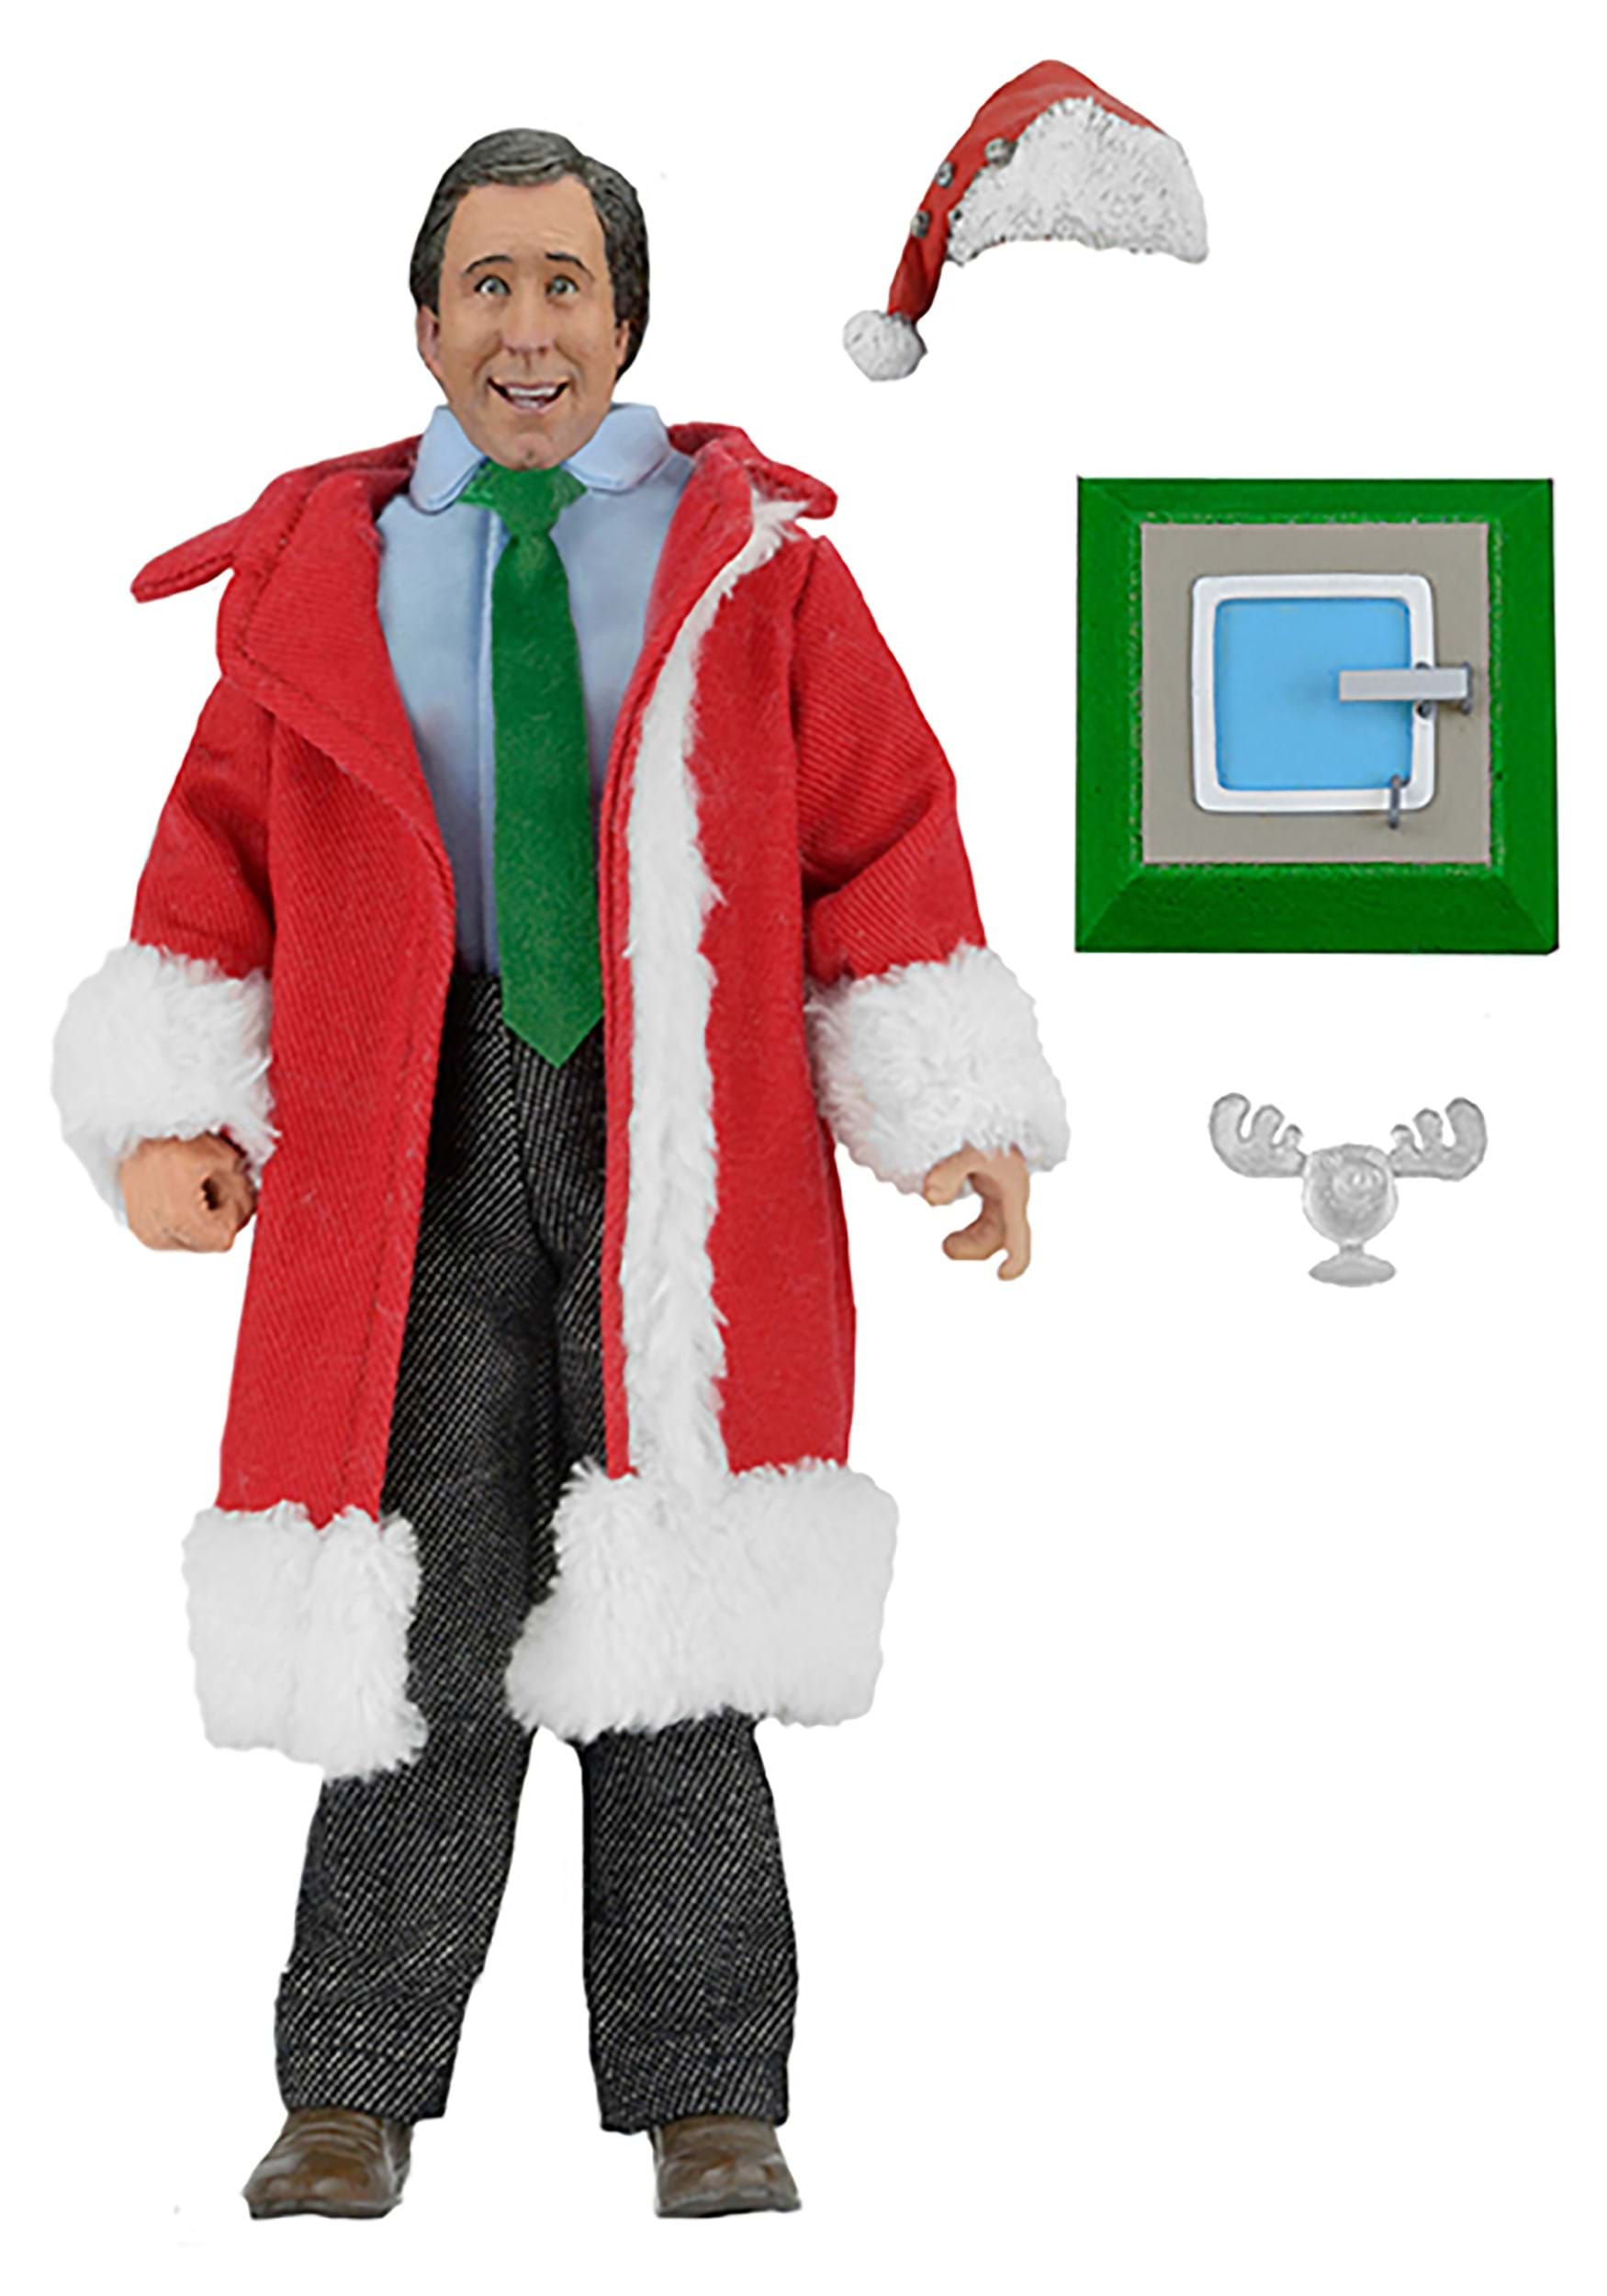 8" Clothed Santa Claus Christmas Vacation Clark Action Figure